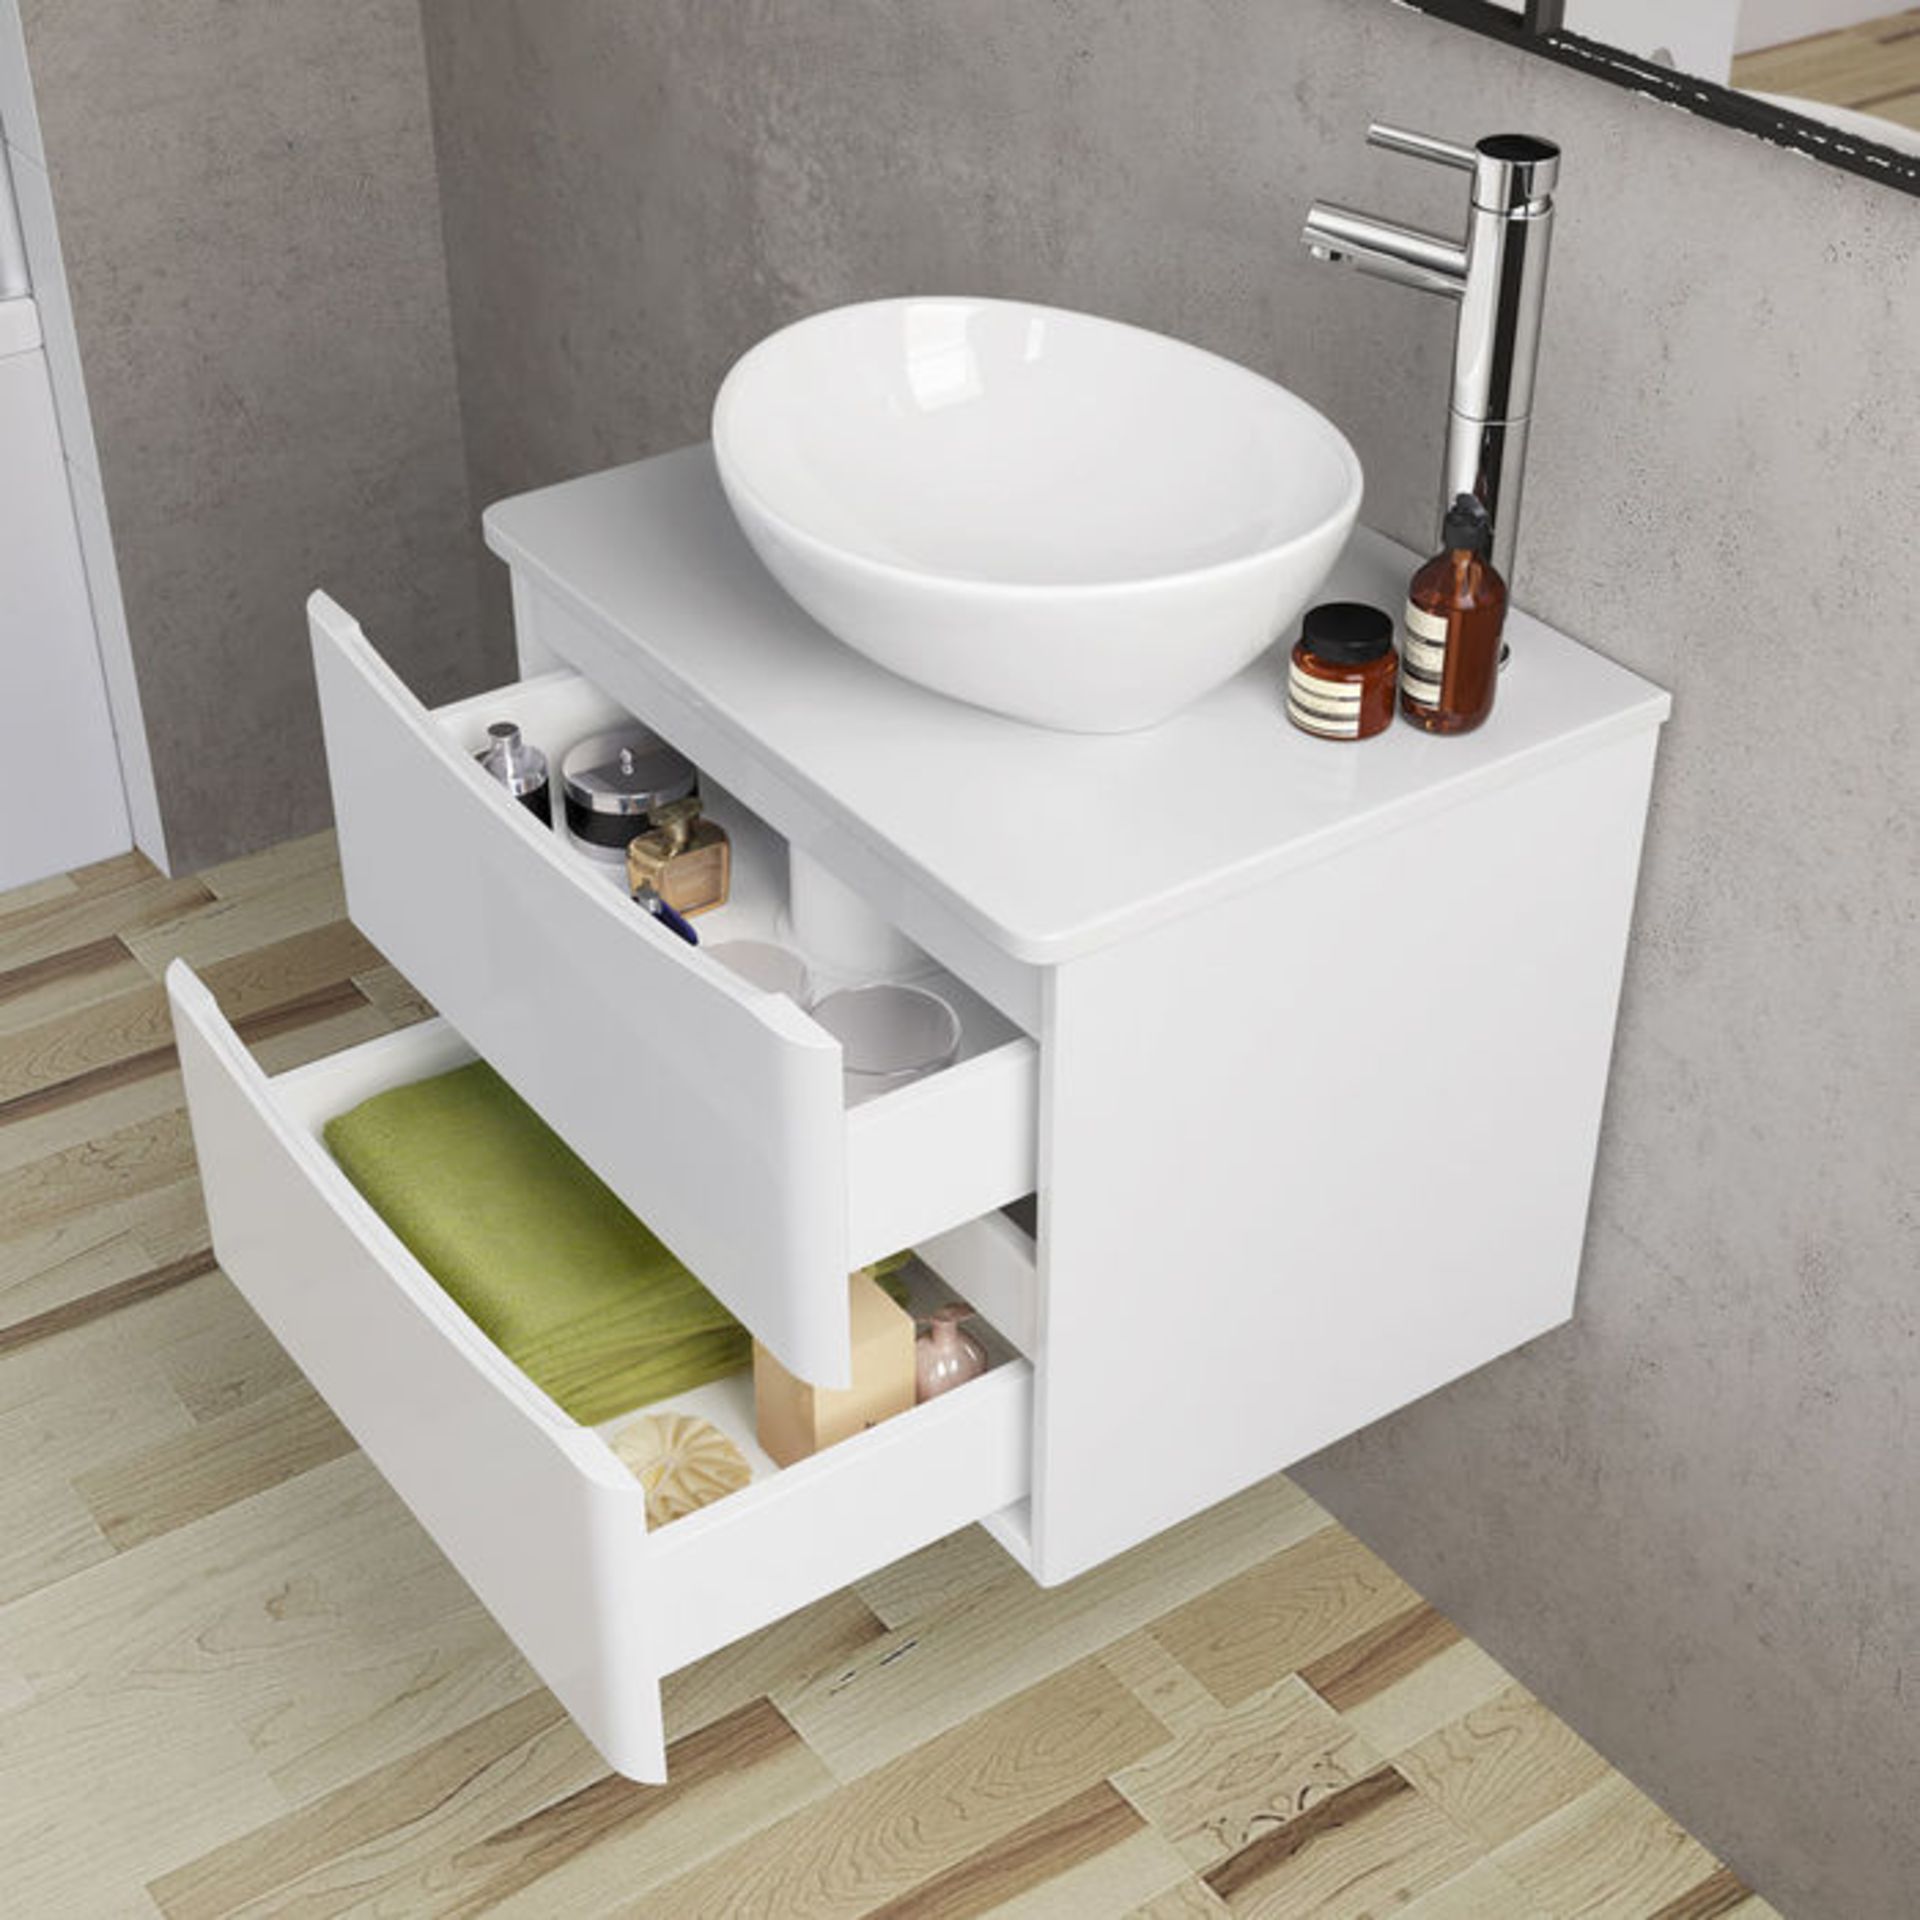 600mm Austin II Gloss White Countertop Unit and Camila Basin - Wall Hung. RRP £899.99.Comes co... - Image 3 of 3